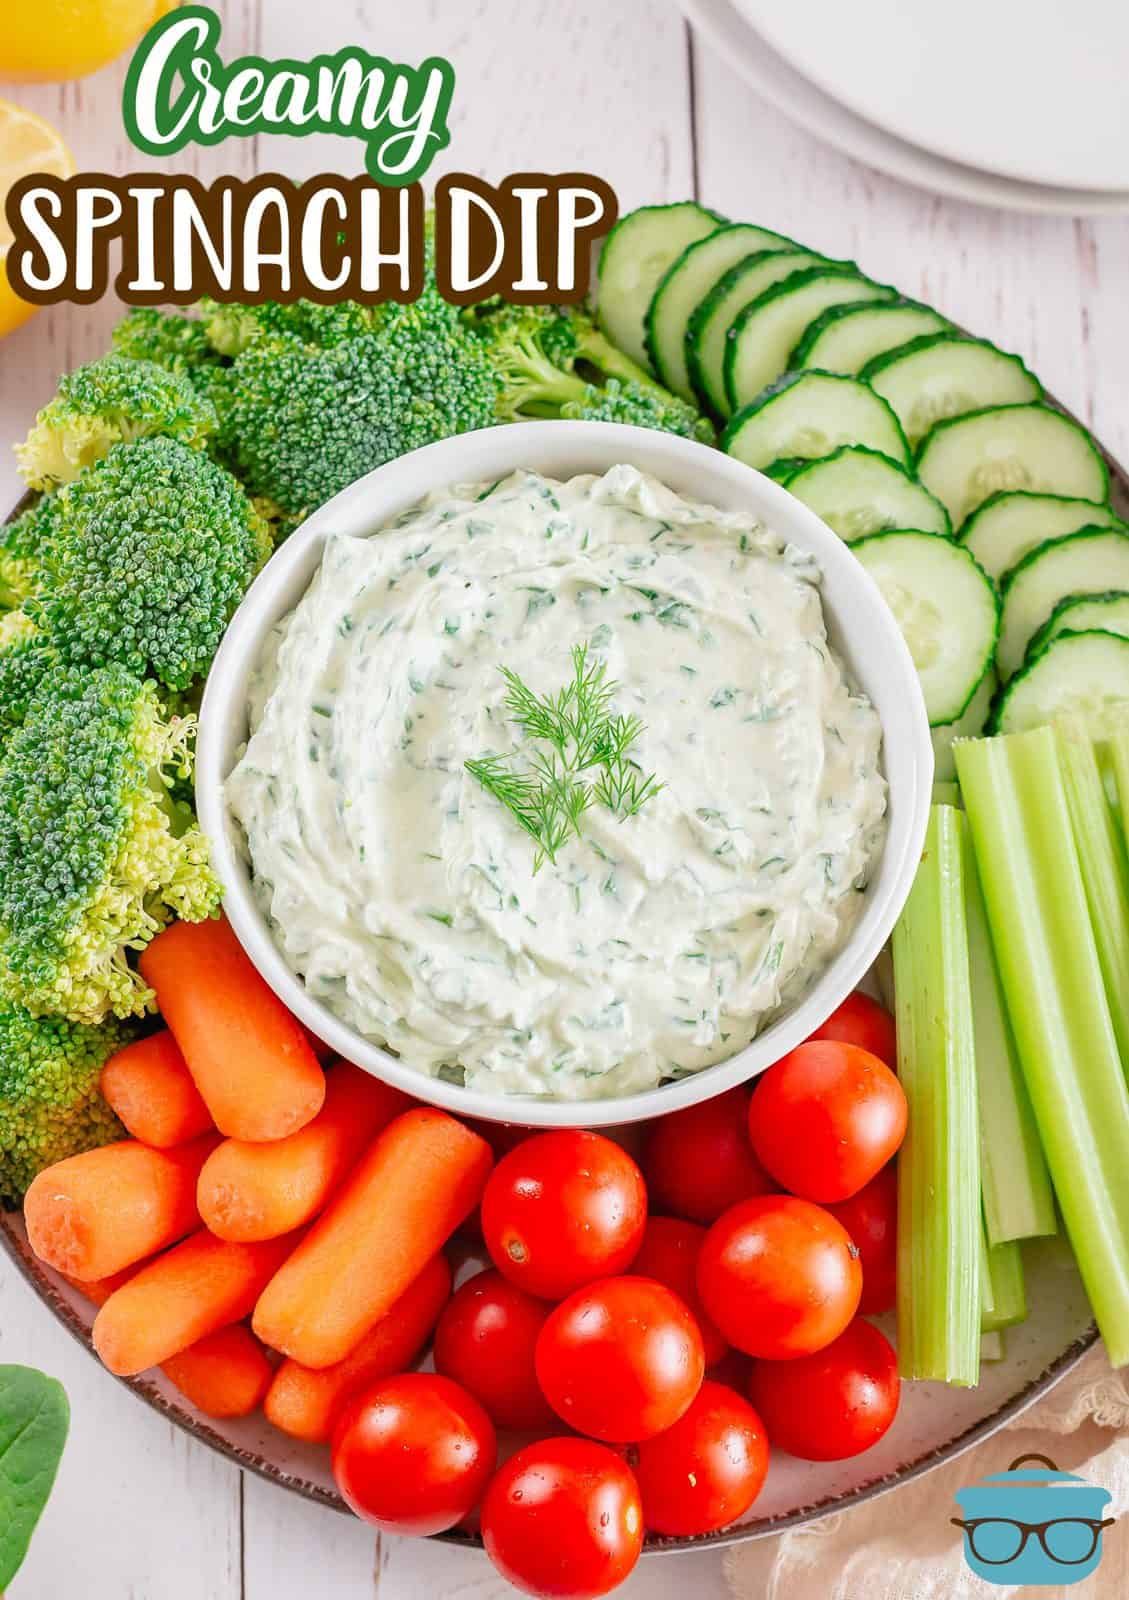 Pinterest image of Spinach Dip in white bowl in center of various vegeables.